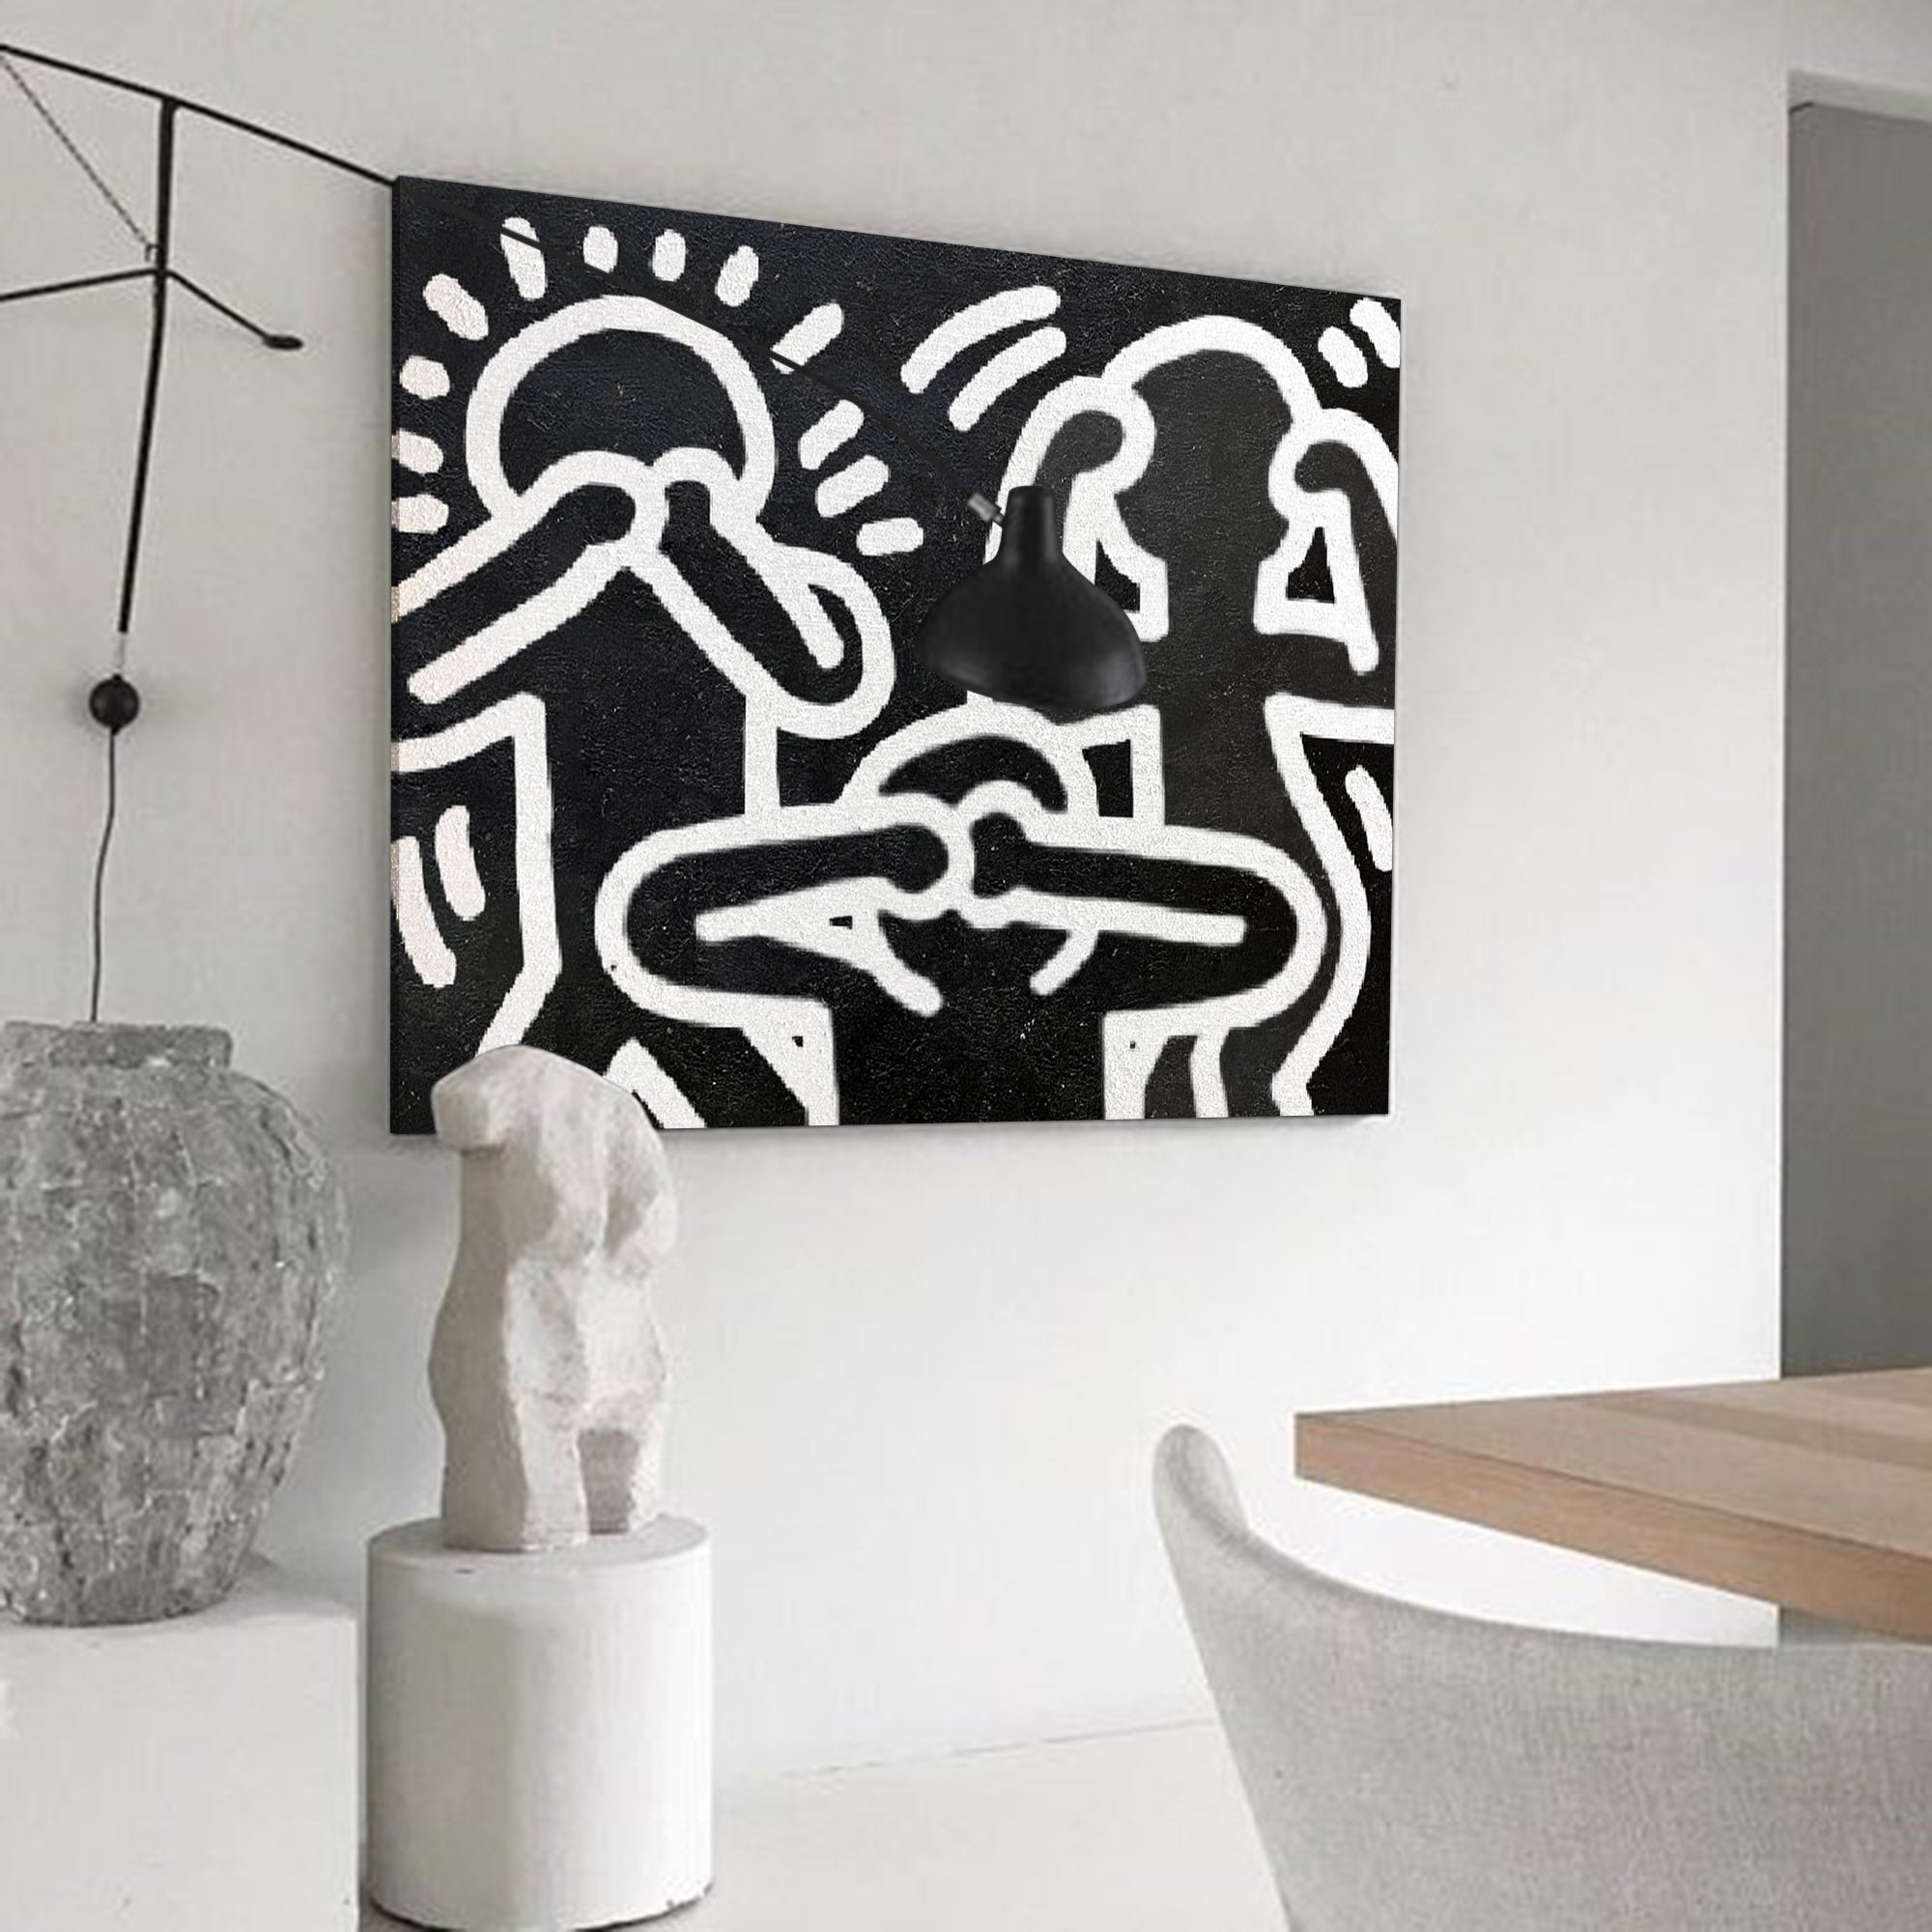 Keith Haring Style Painting #KS019